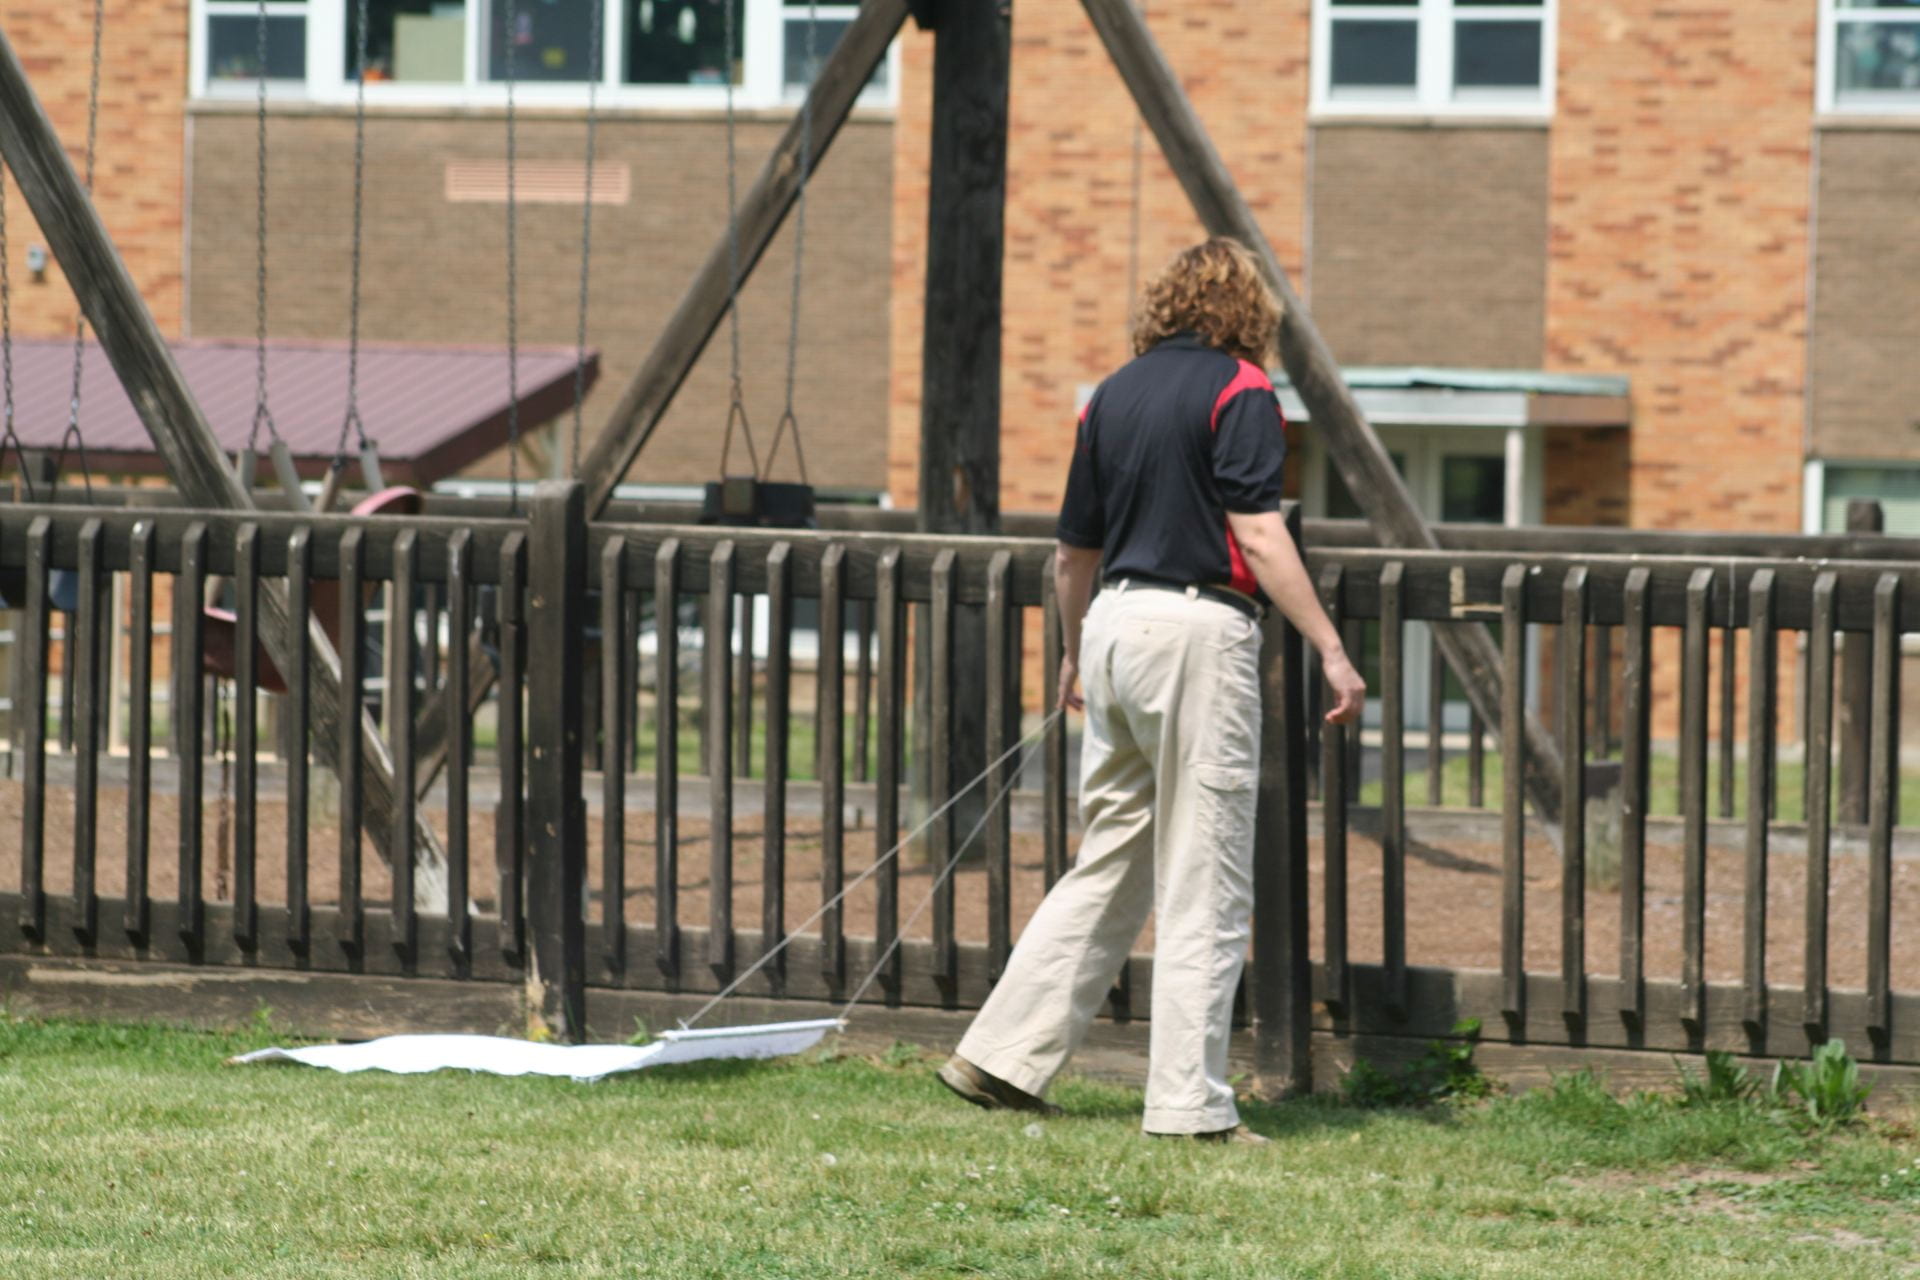 photo shows Joellen Lampman using a tick drag on school property to monitor for ticks